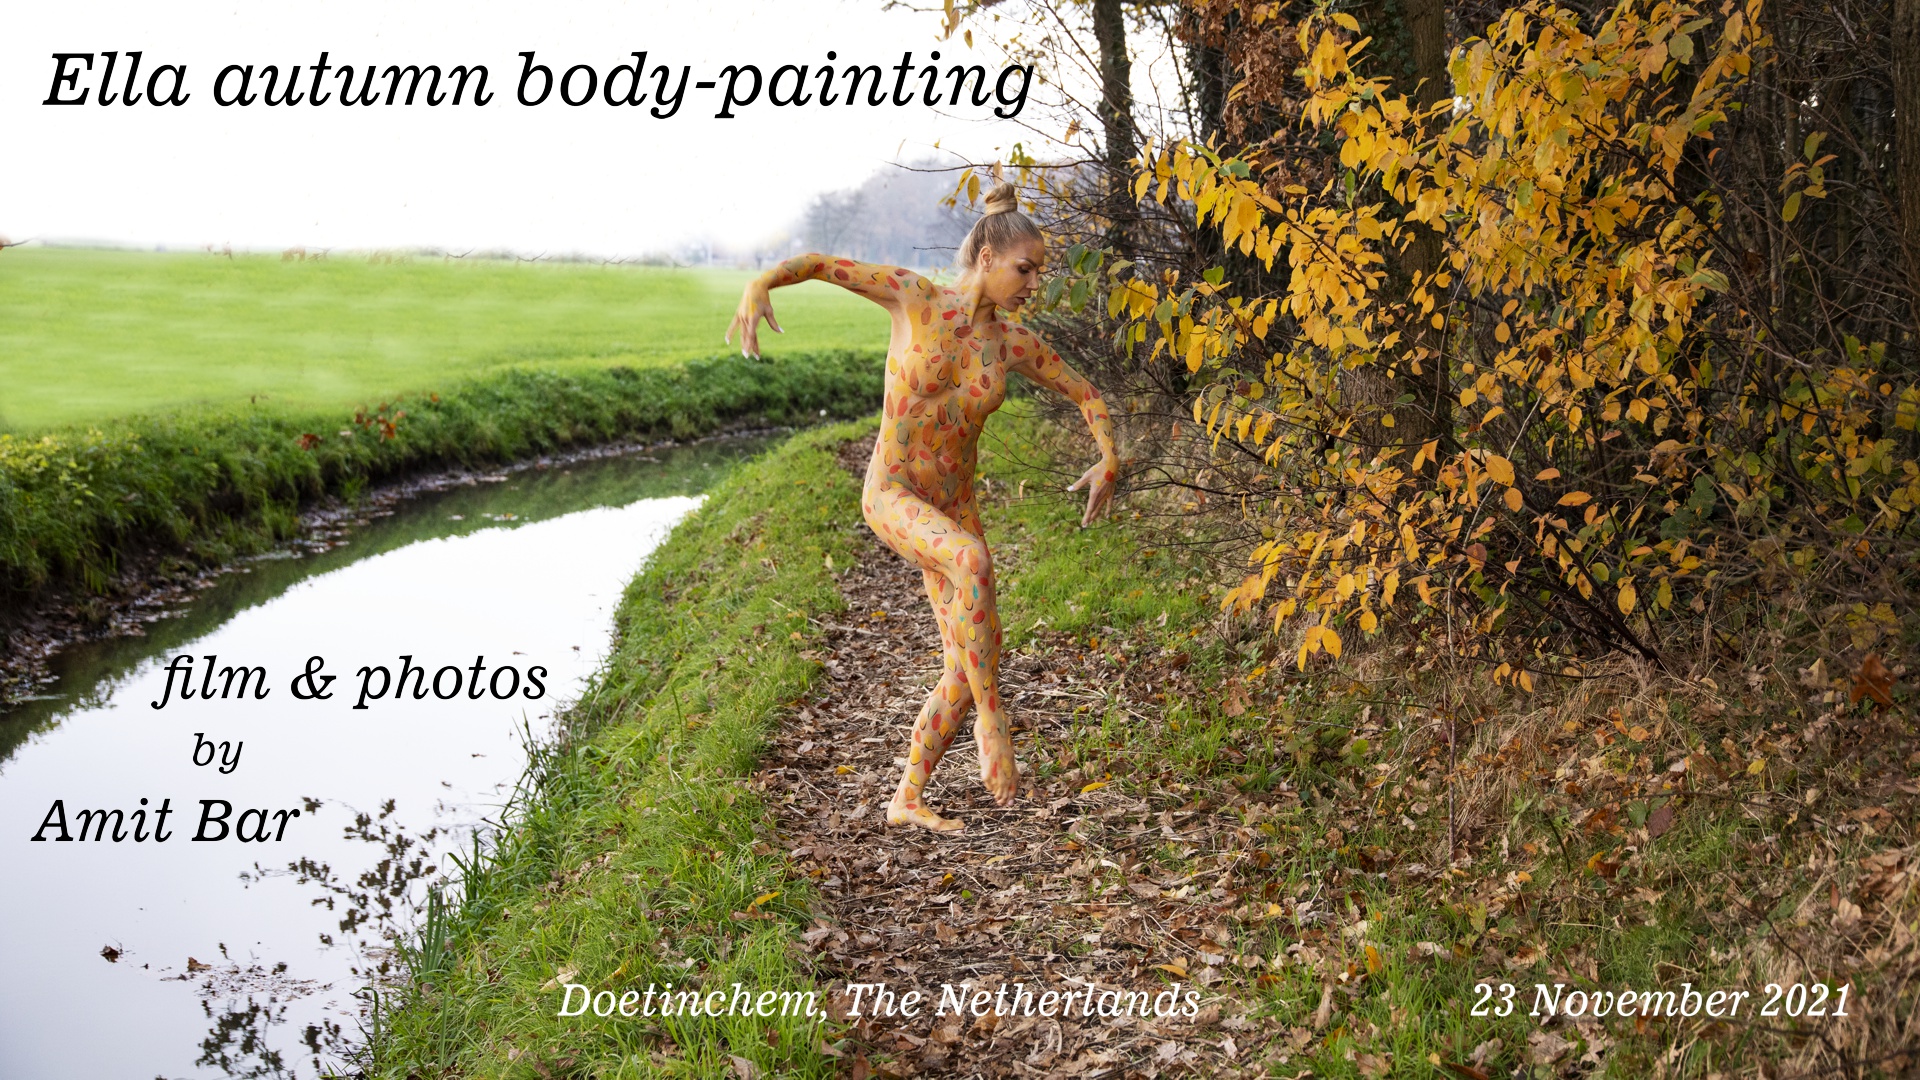 Ella autumn body-painting: Body-painted Ella is dancing among the autumn leaves in nature